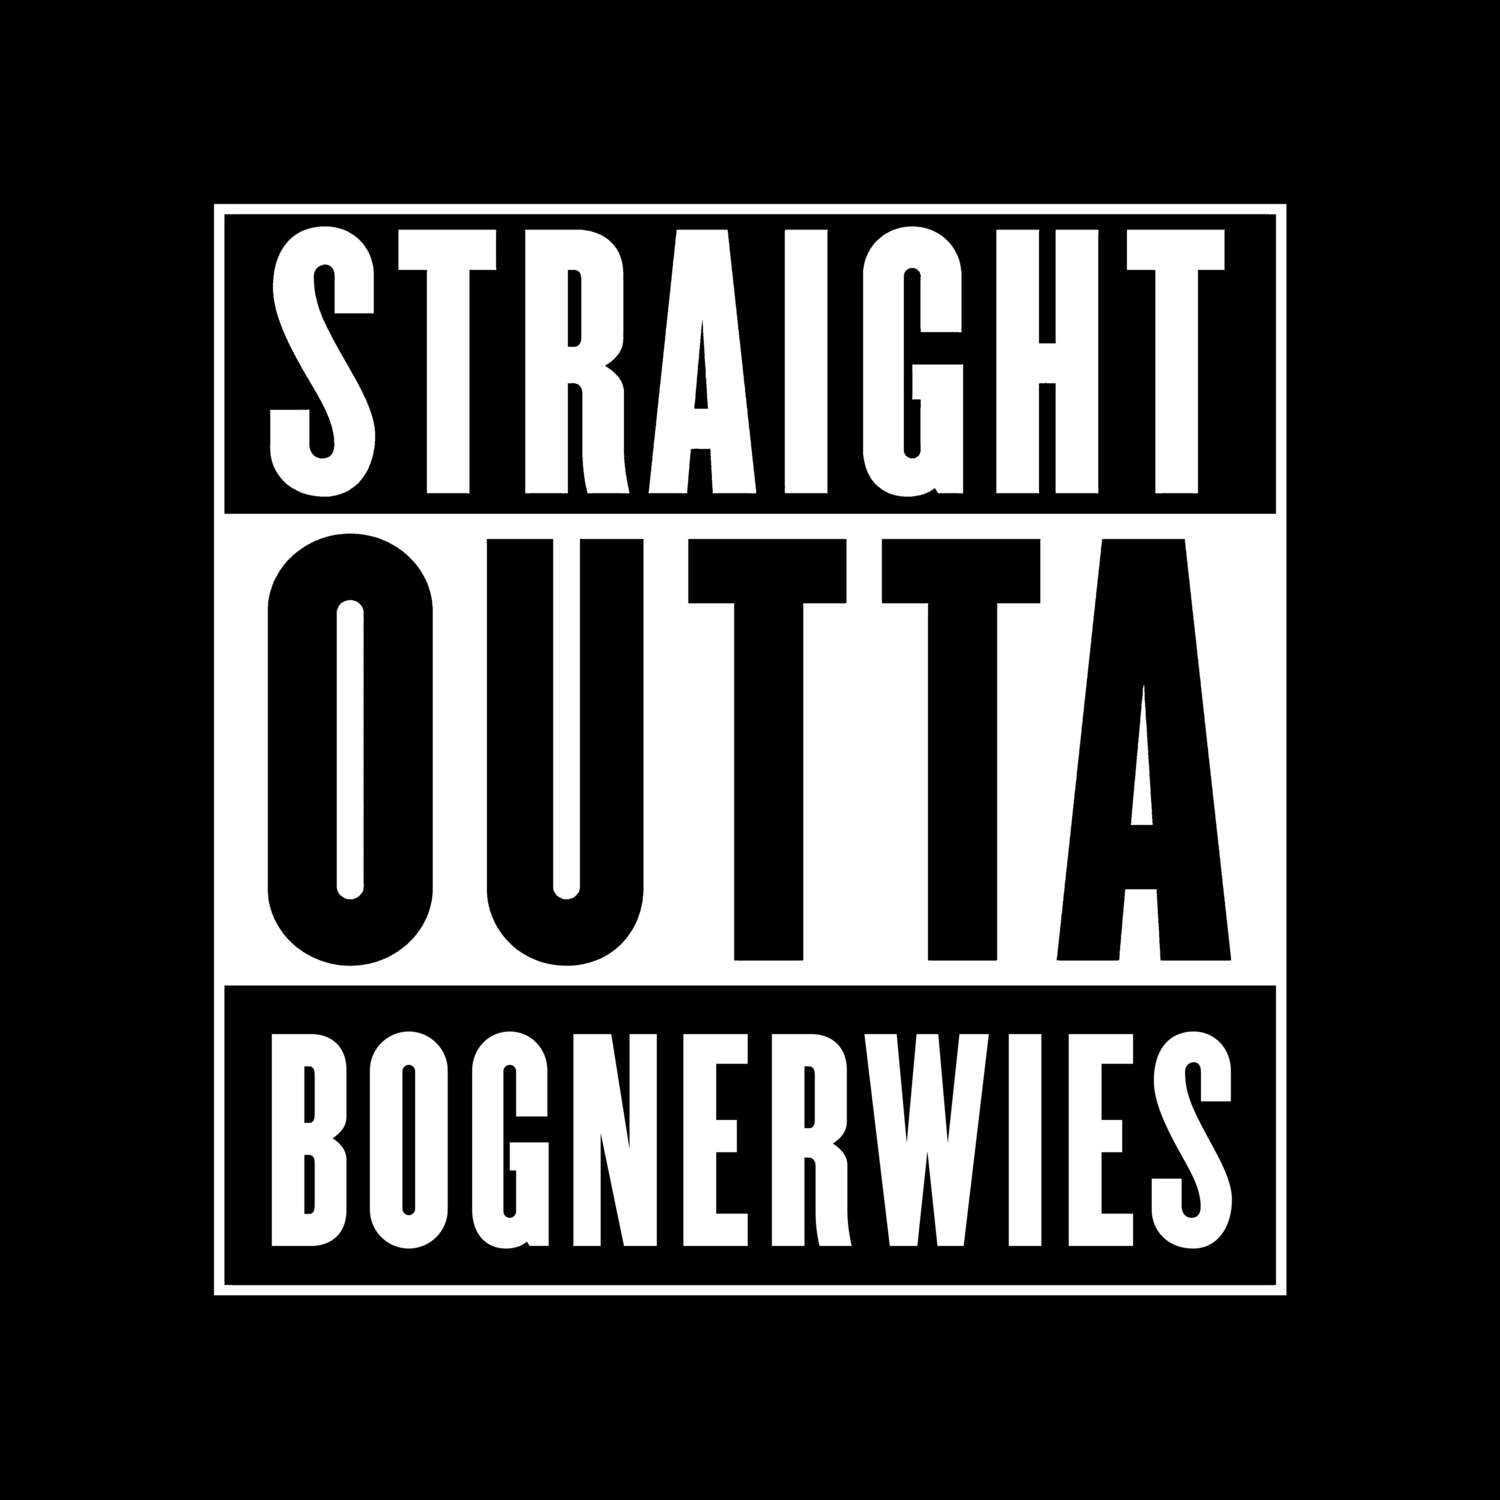 Bognerwies T-Shirt »Straight Outta«